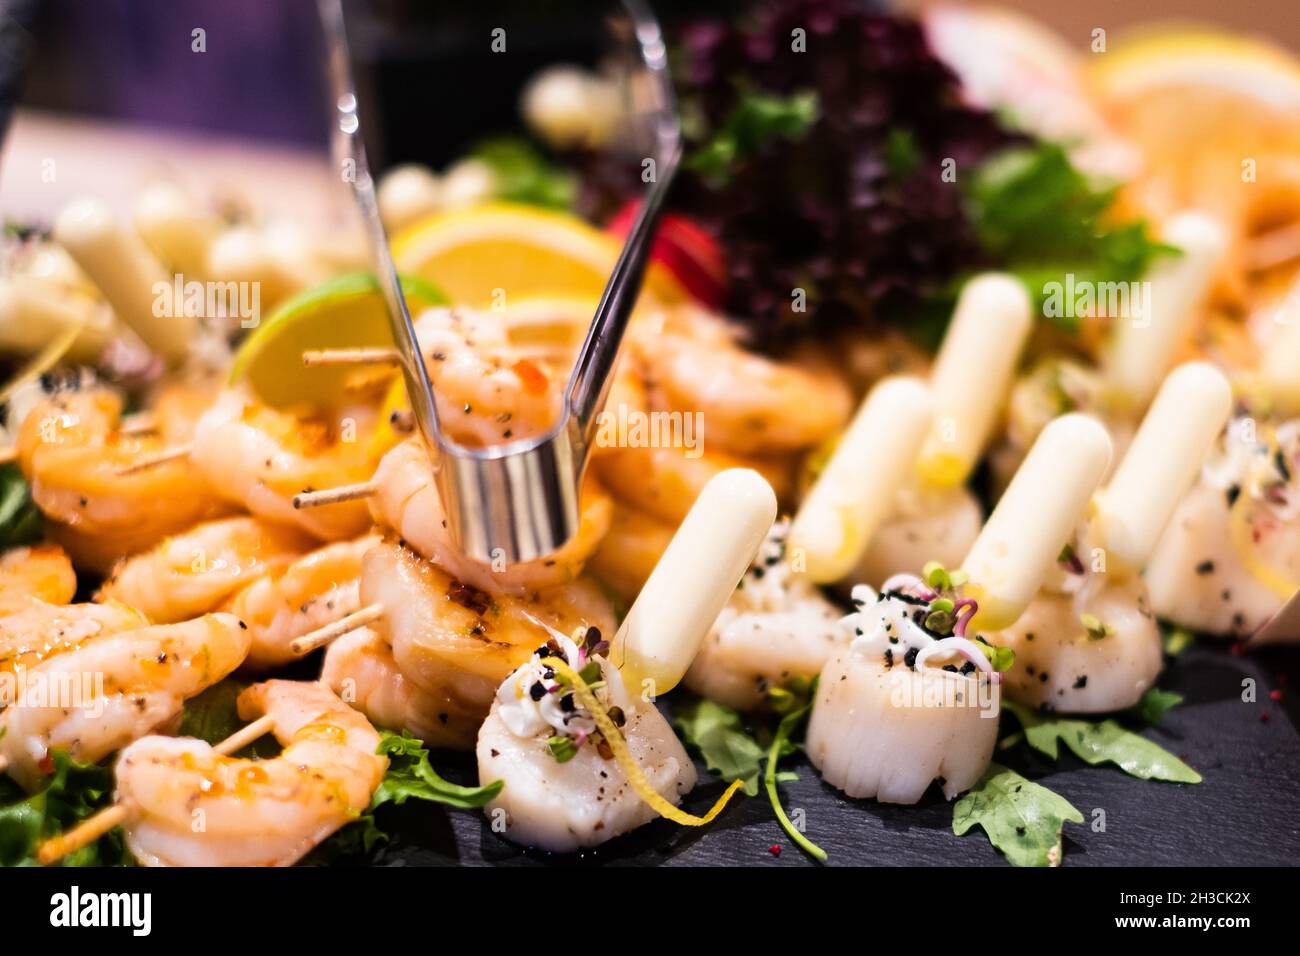 Grilled tiger prawns and baked scallops with lemon-saffron sauce. Delicious professional looking food and snacks served at catering event or party Stock Photo